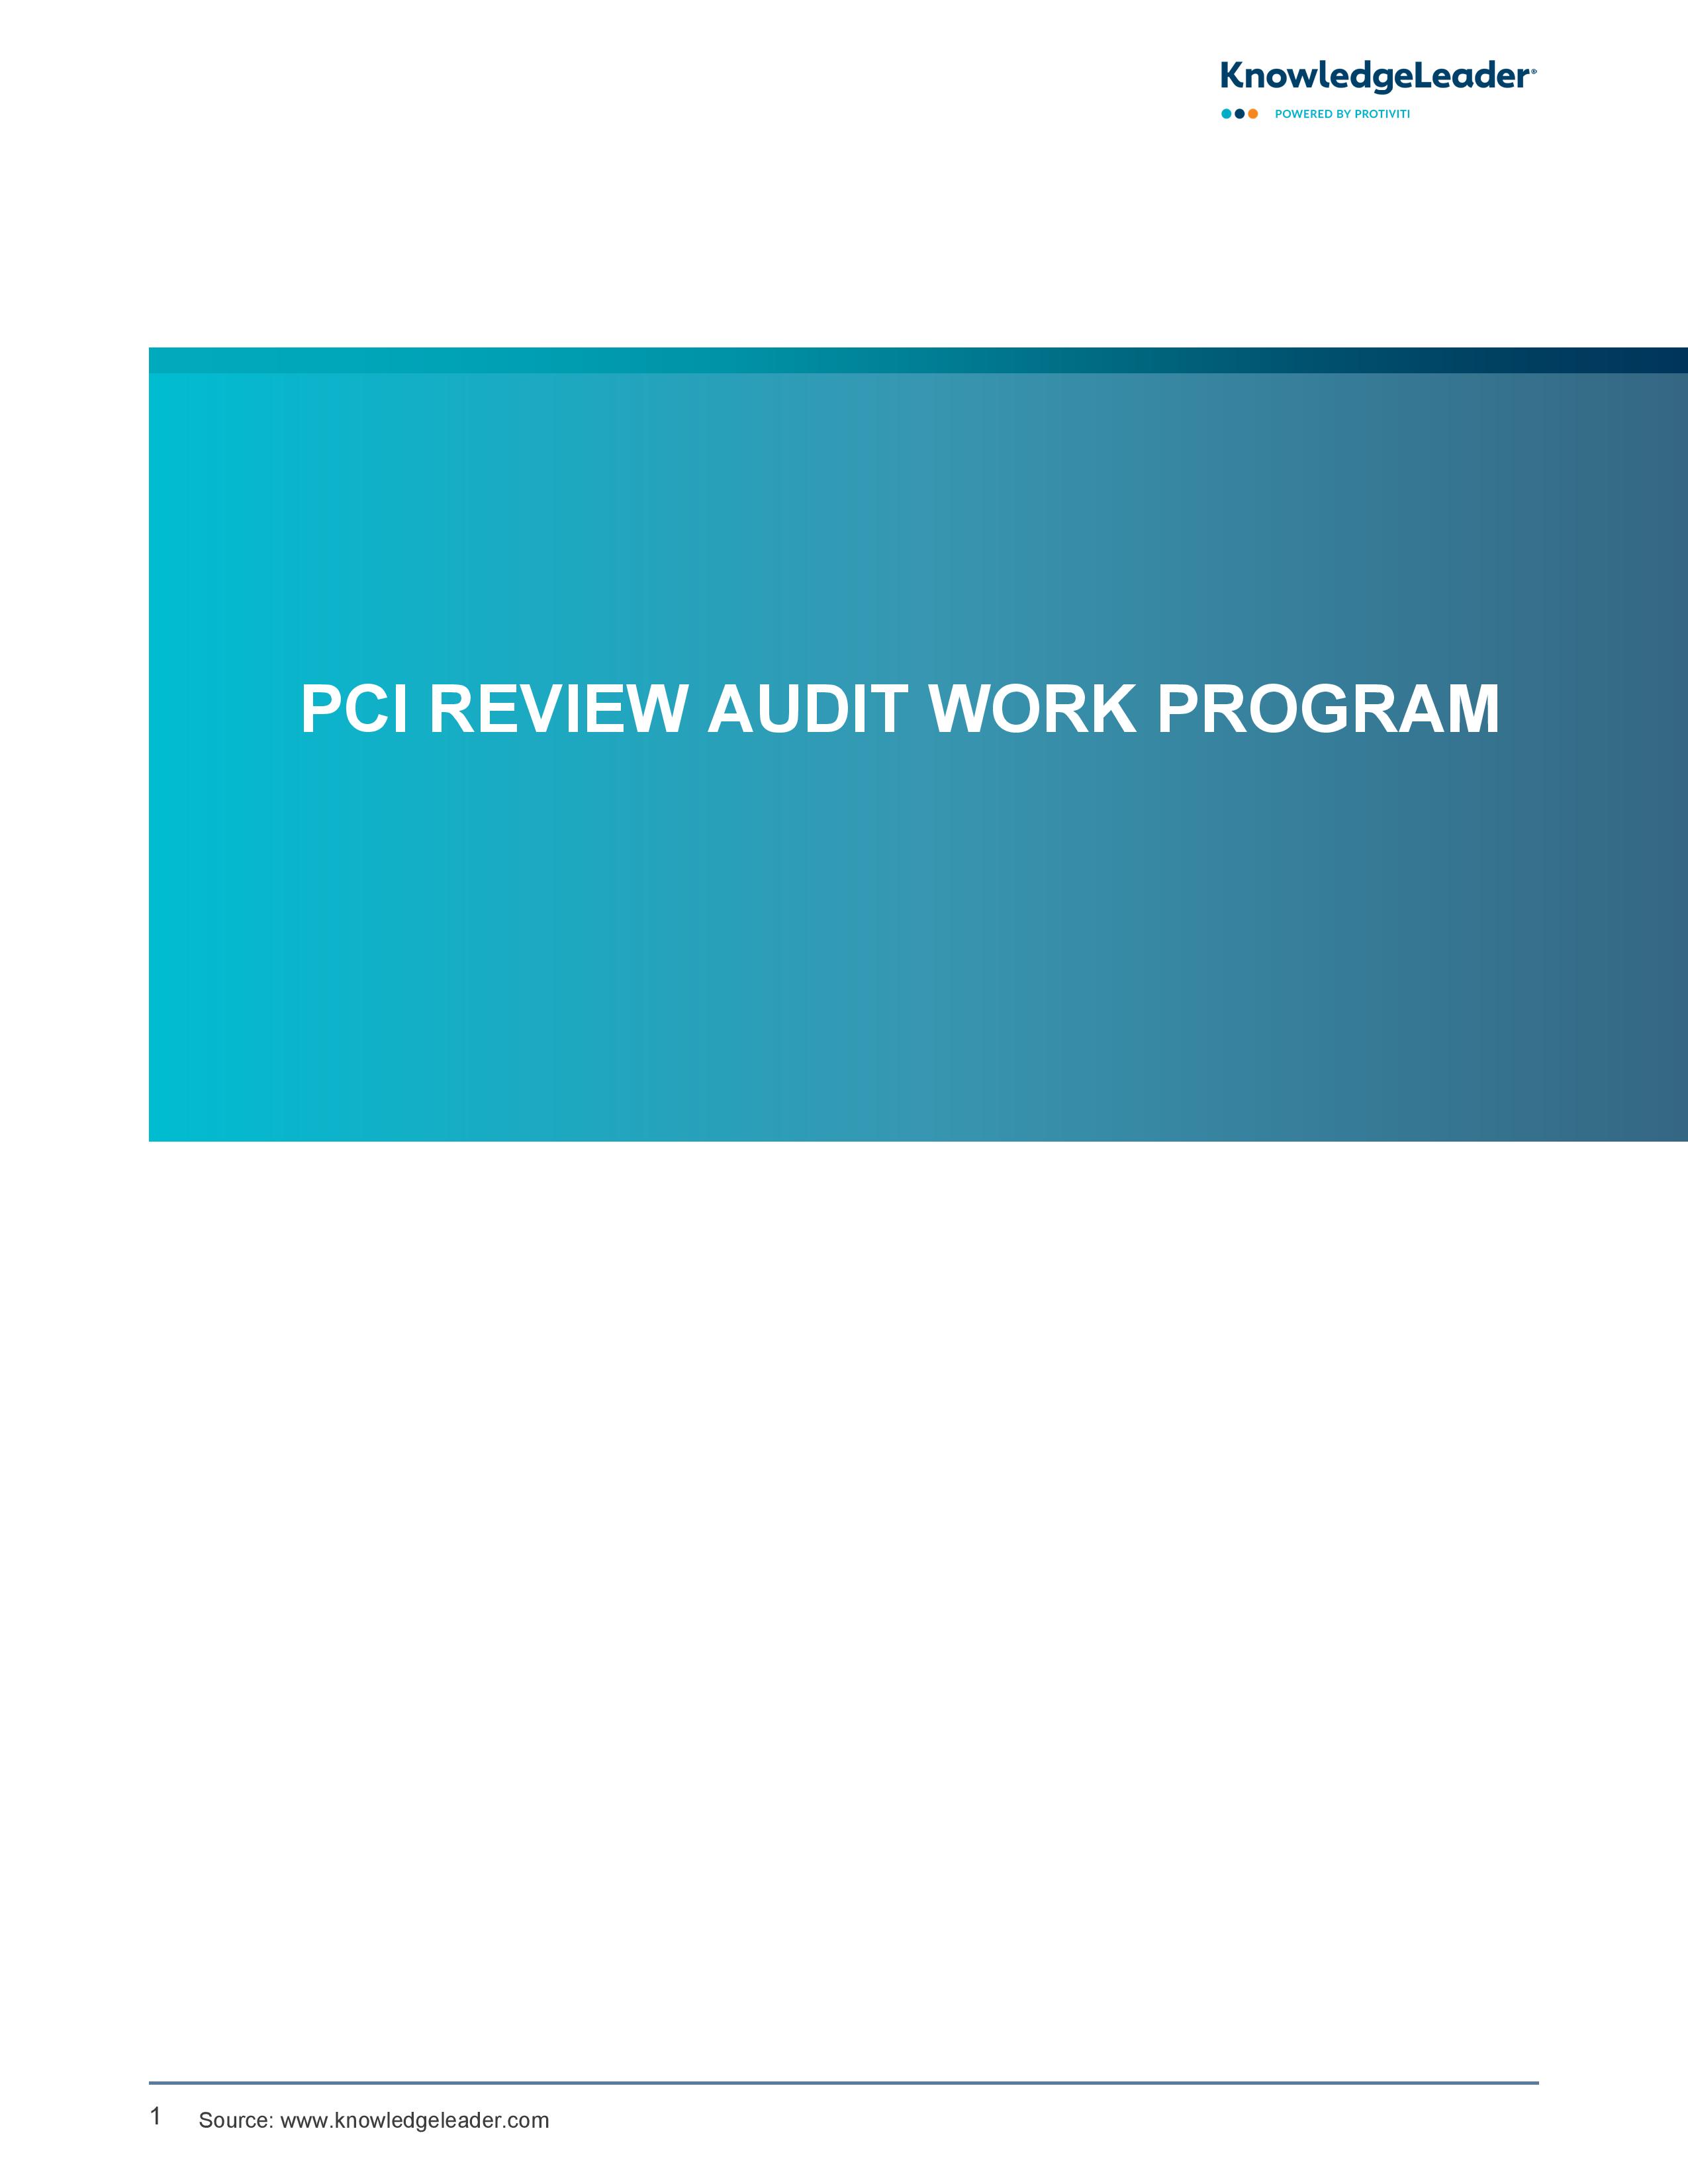 screenshot of the first page of PCI Review Audit Work Program